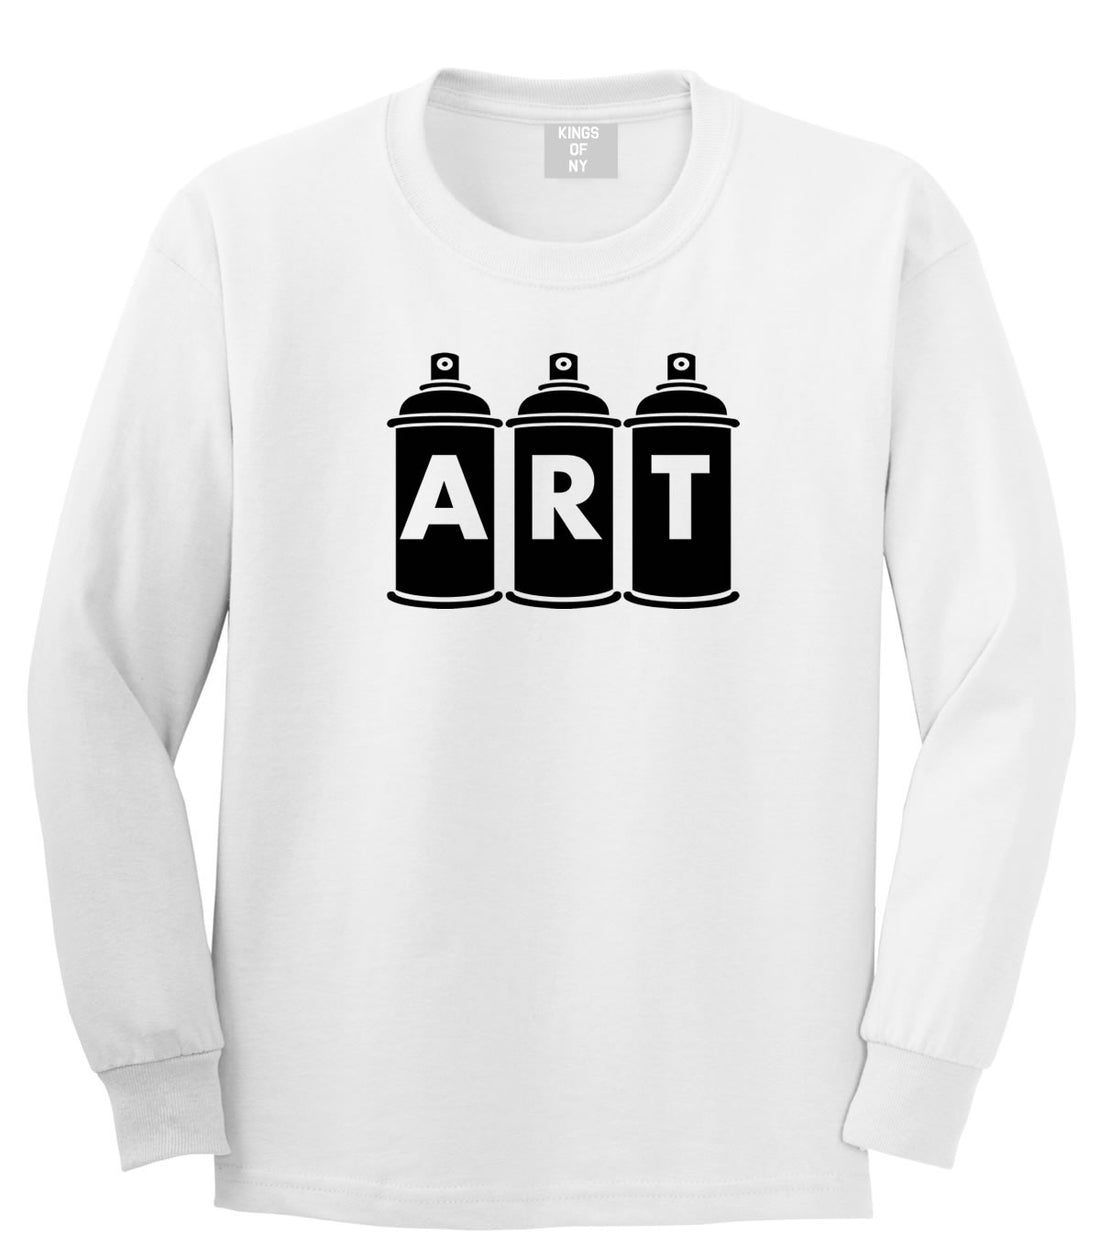 Art graf graffiti spray can paint artist Long Sleeve T-Shirt in White By Kings Of NY